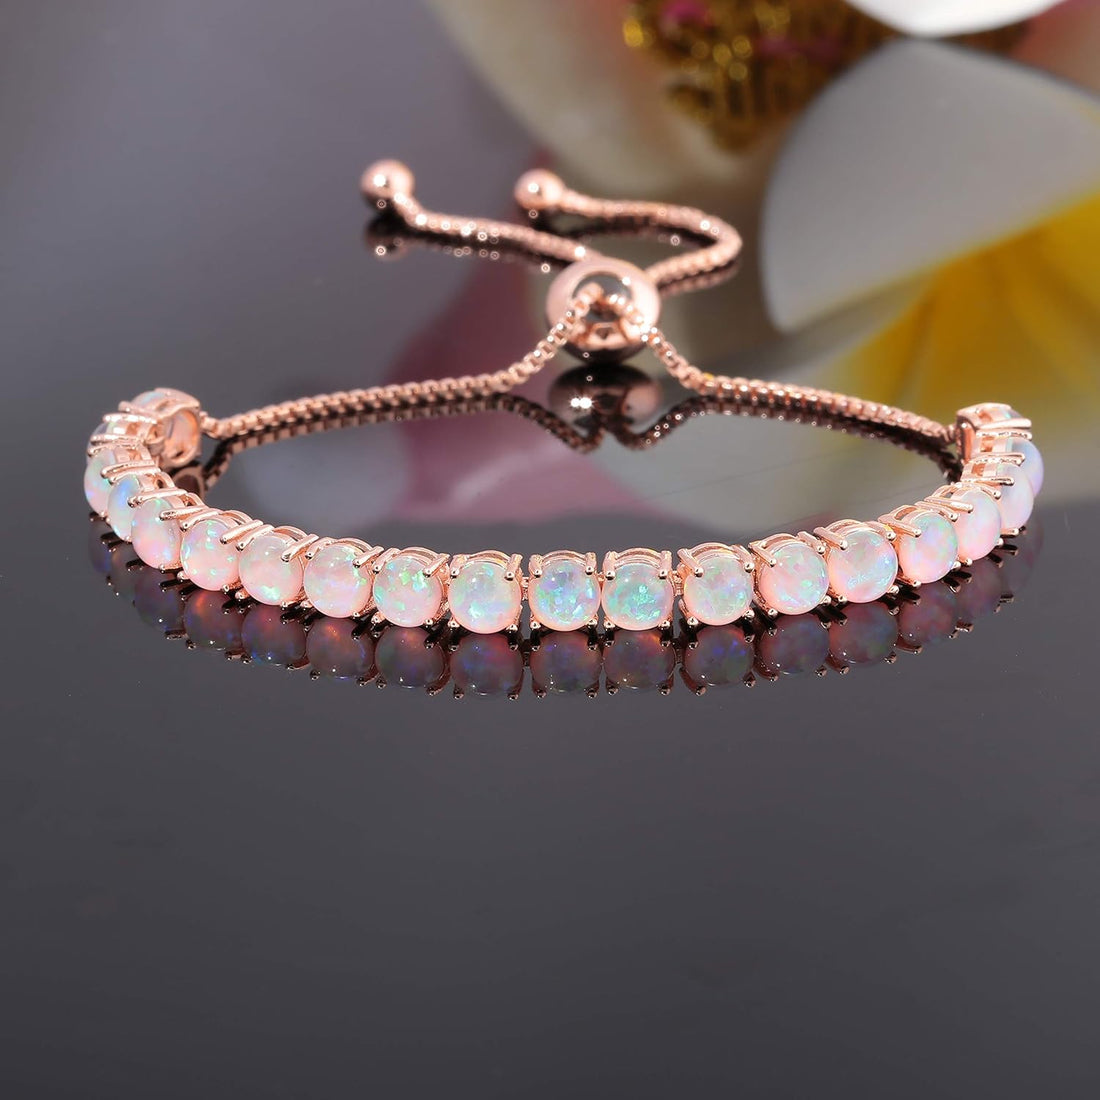 Adjustable Silver Plated Australian Opal Tennis Bracelet - Fashion Jewelry Gift dipped in rose gold plating 